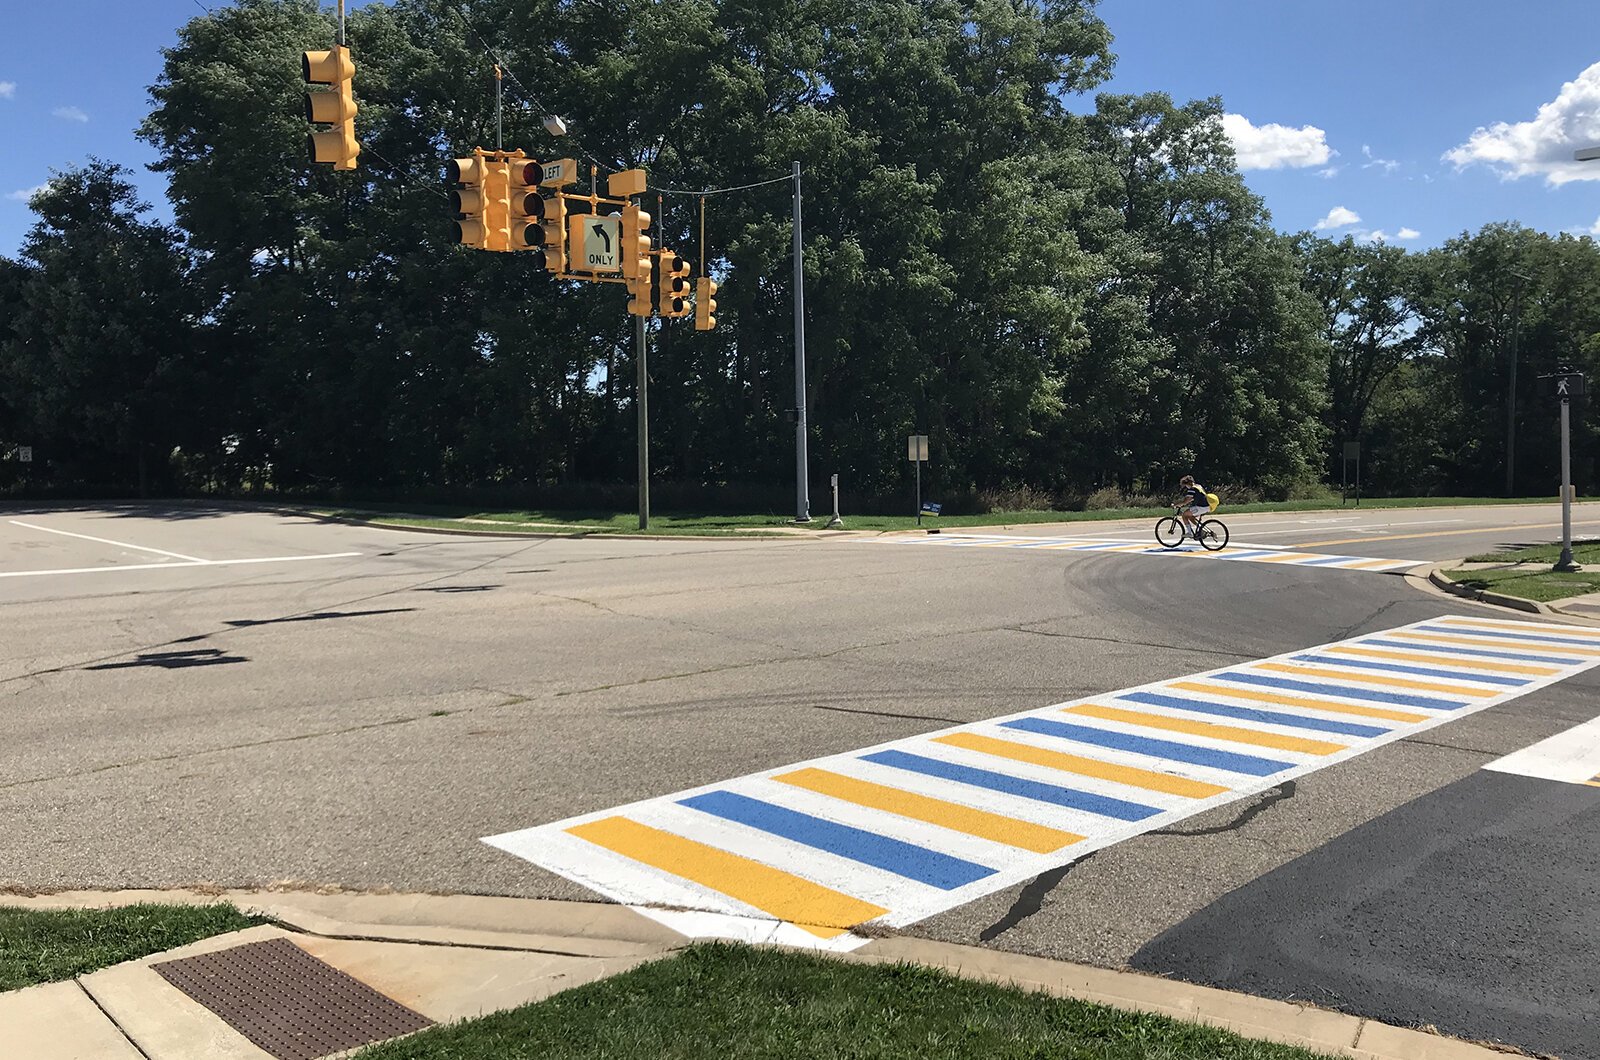 This painted crosswalk was part of last year's Chelsea POP demonstration project.